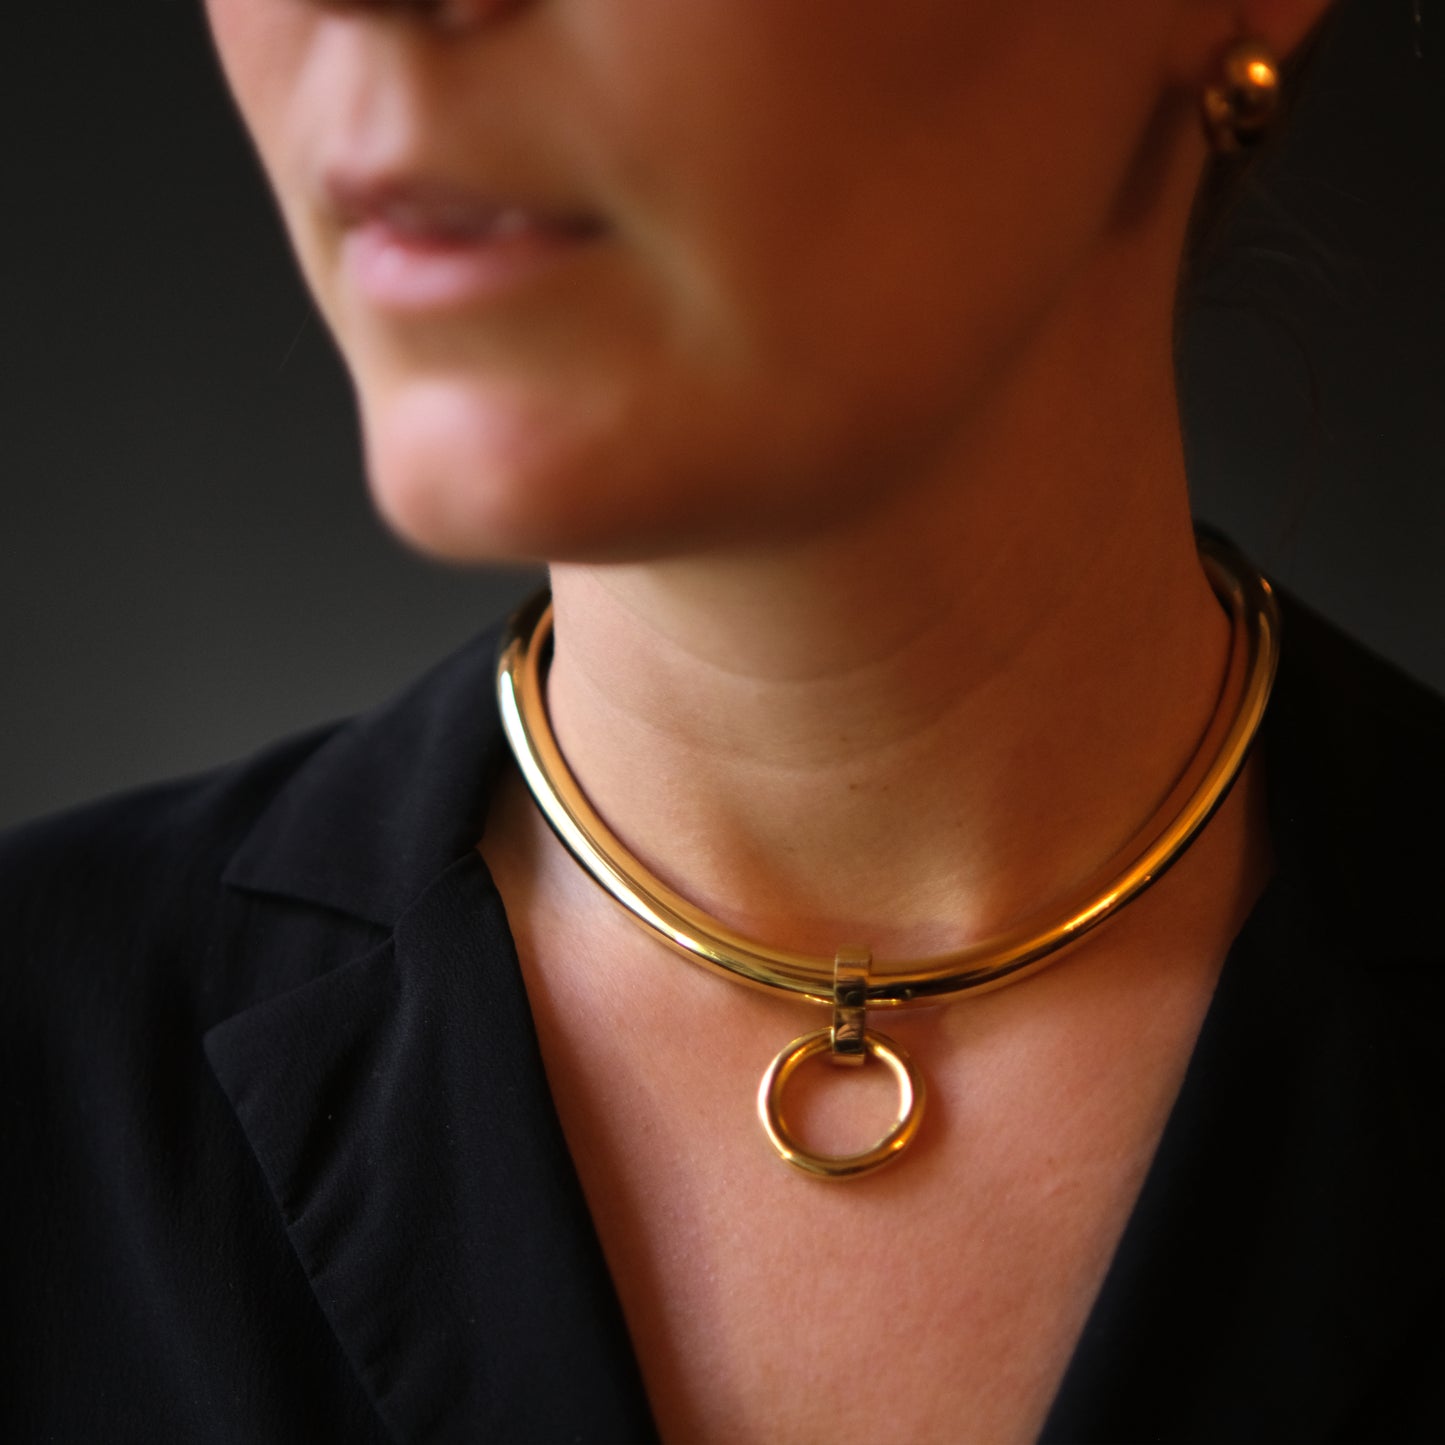 Ergonomically shaped eternity collar with ring and hexagonal key